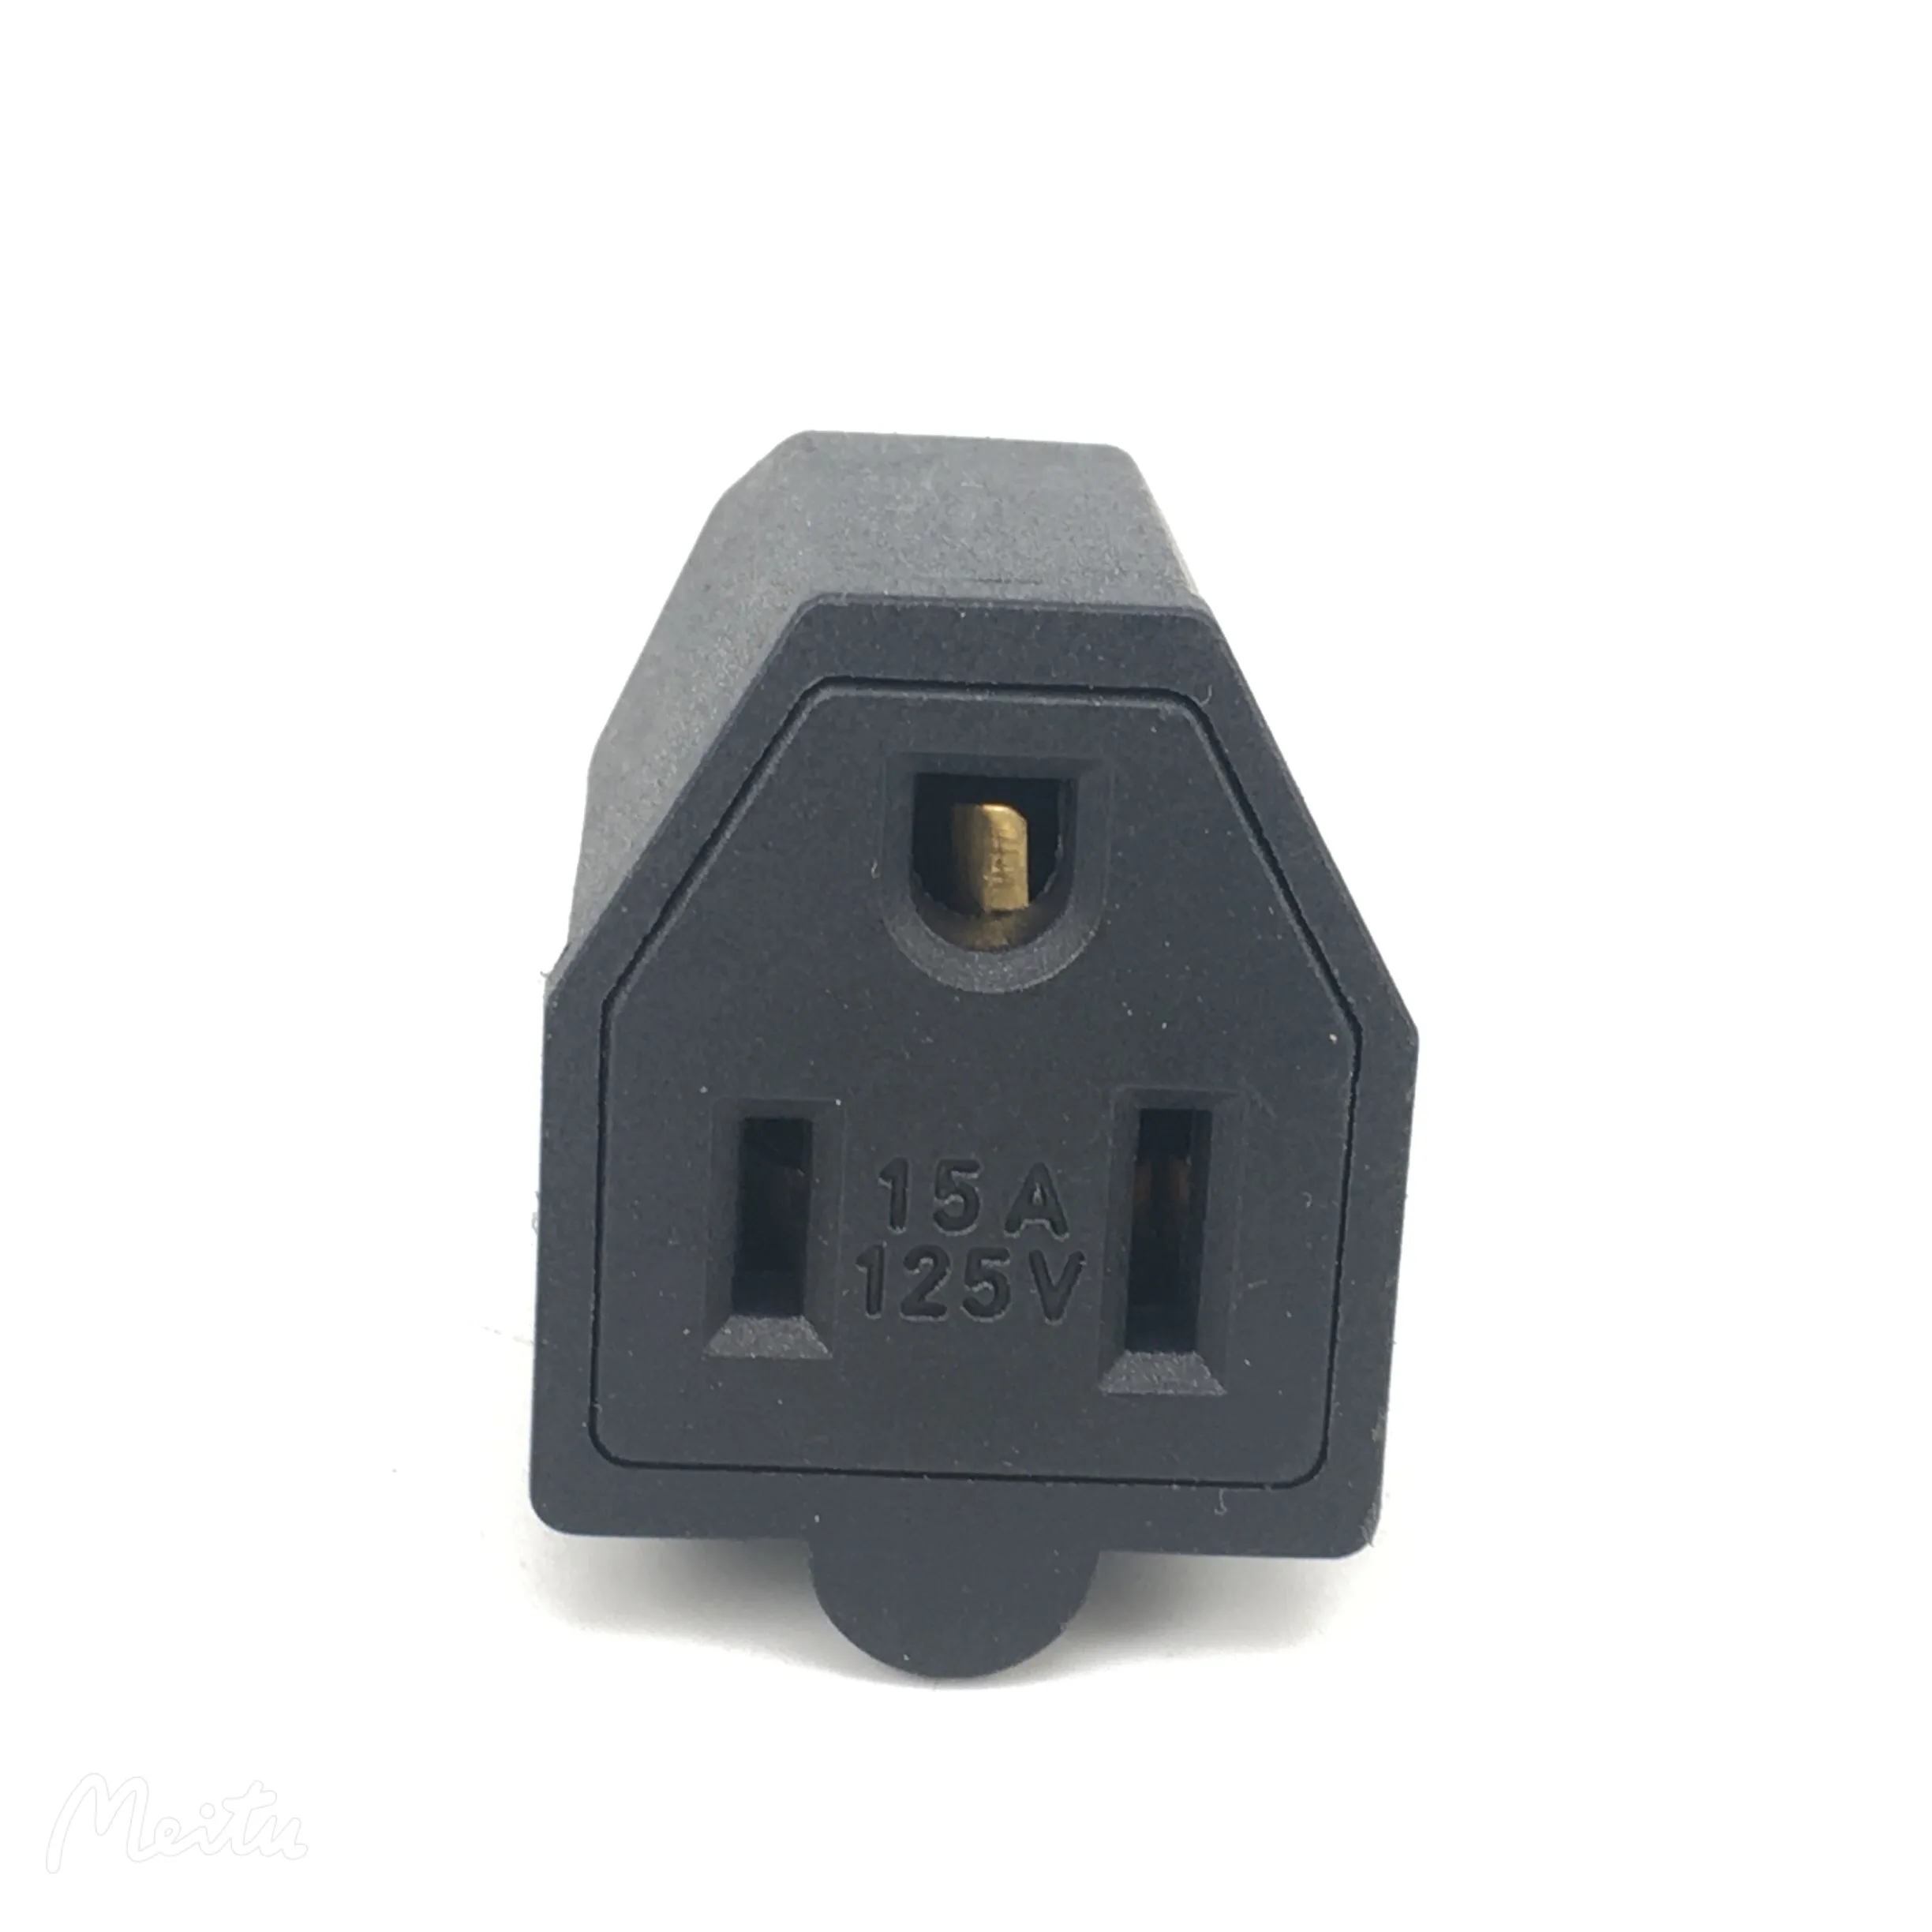 US American 3 Pin AC Electric Power Rewireable Socket Outlet Male